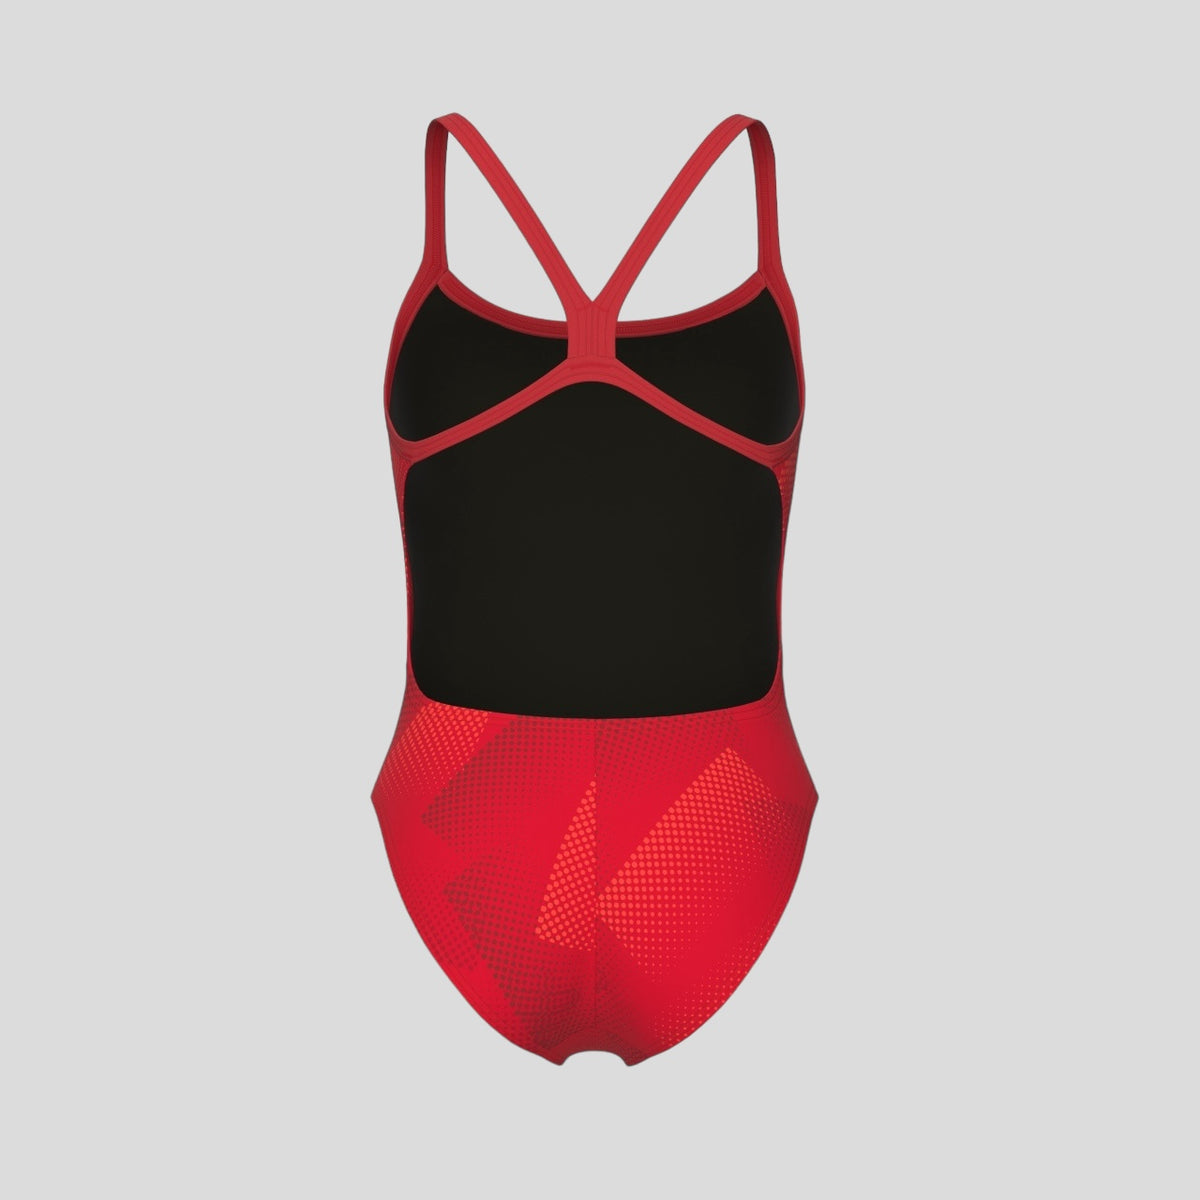 WOMENS ARENA HALFTONE SWIMSUIT CHALLENGE BACK